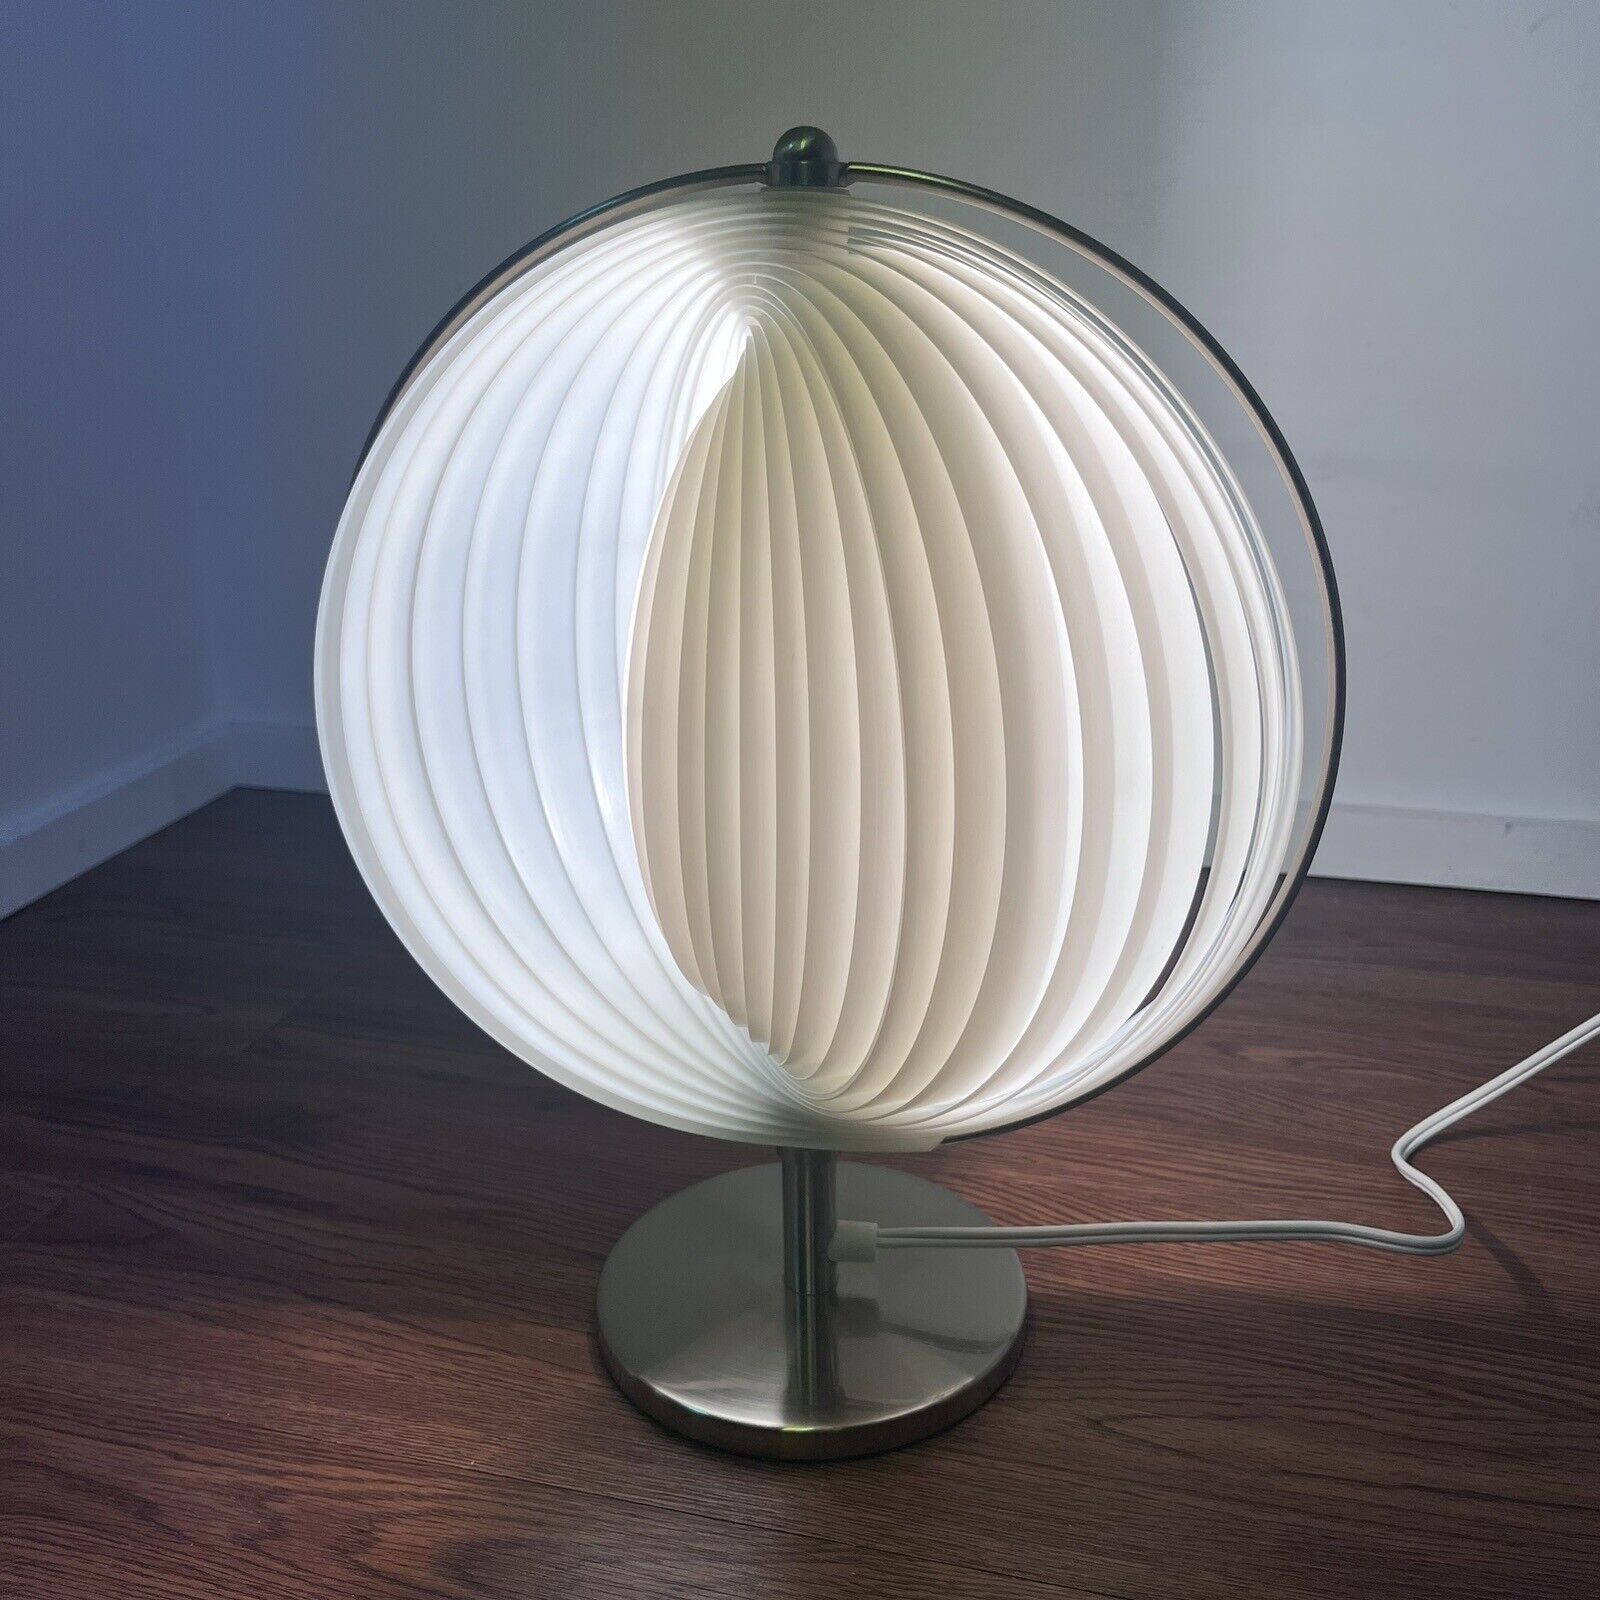 Vintage Verner Panton Danish Style Moon Sphere Table Lamp - Collapsible Shade